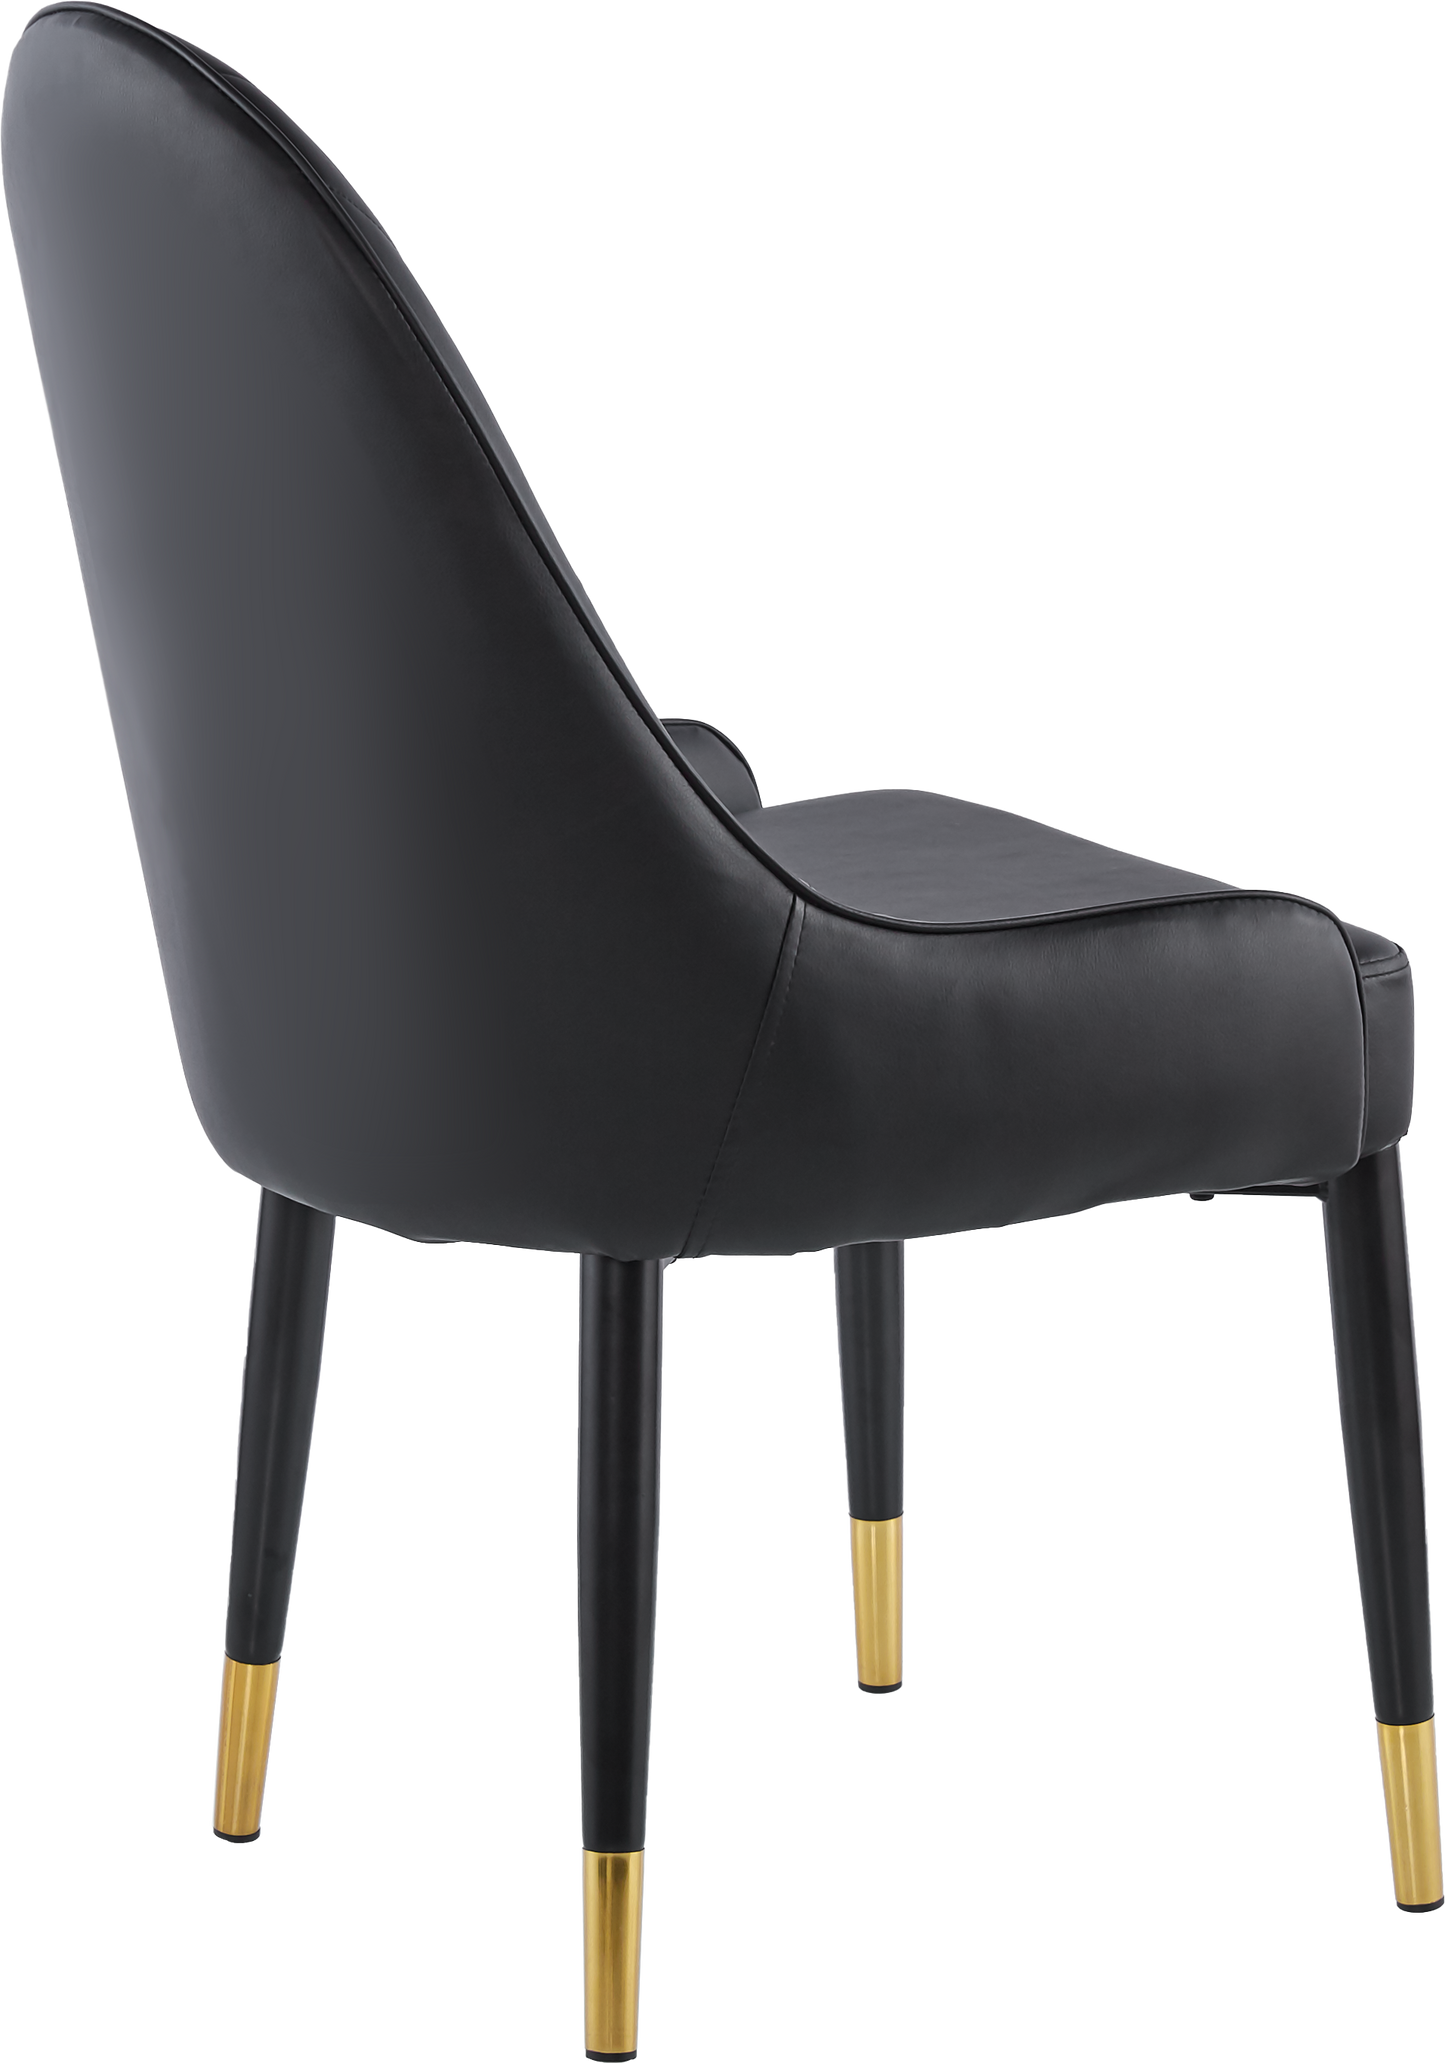 Modern Leather Dining Chair Set of 2, Upholstered Accent Dining Chair, Legs with Black Plastic Tube Plug